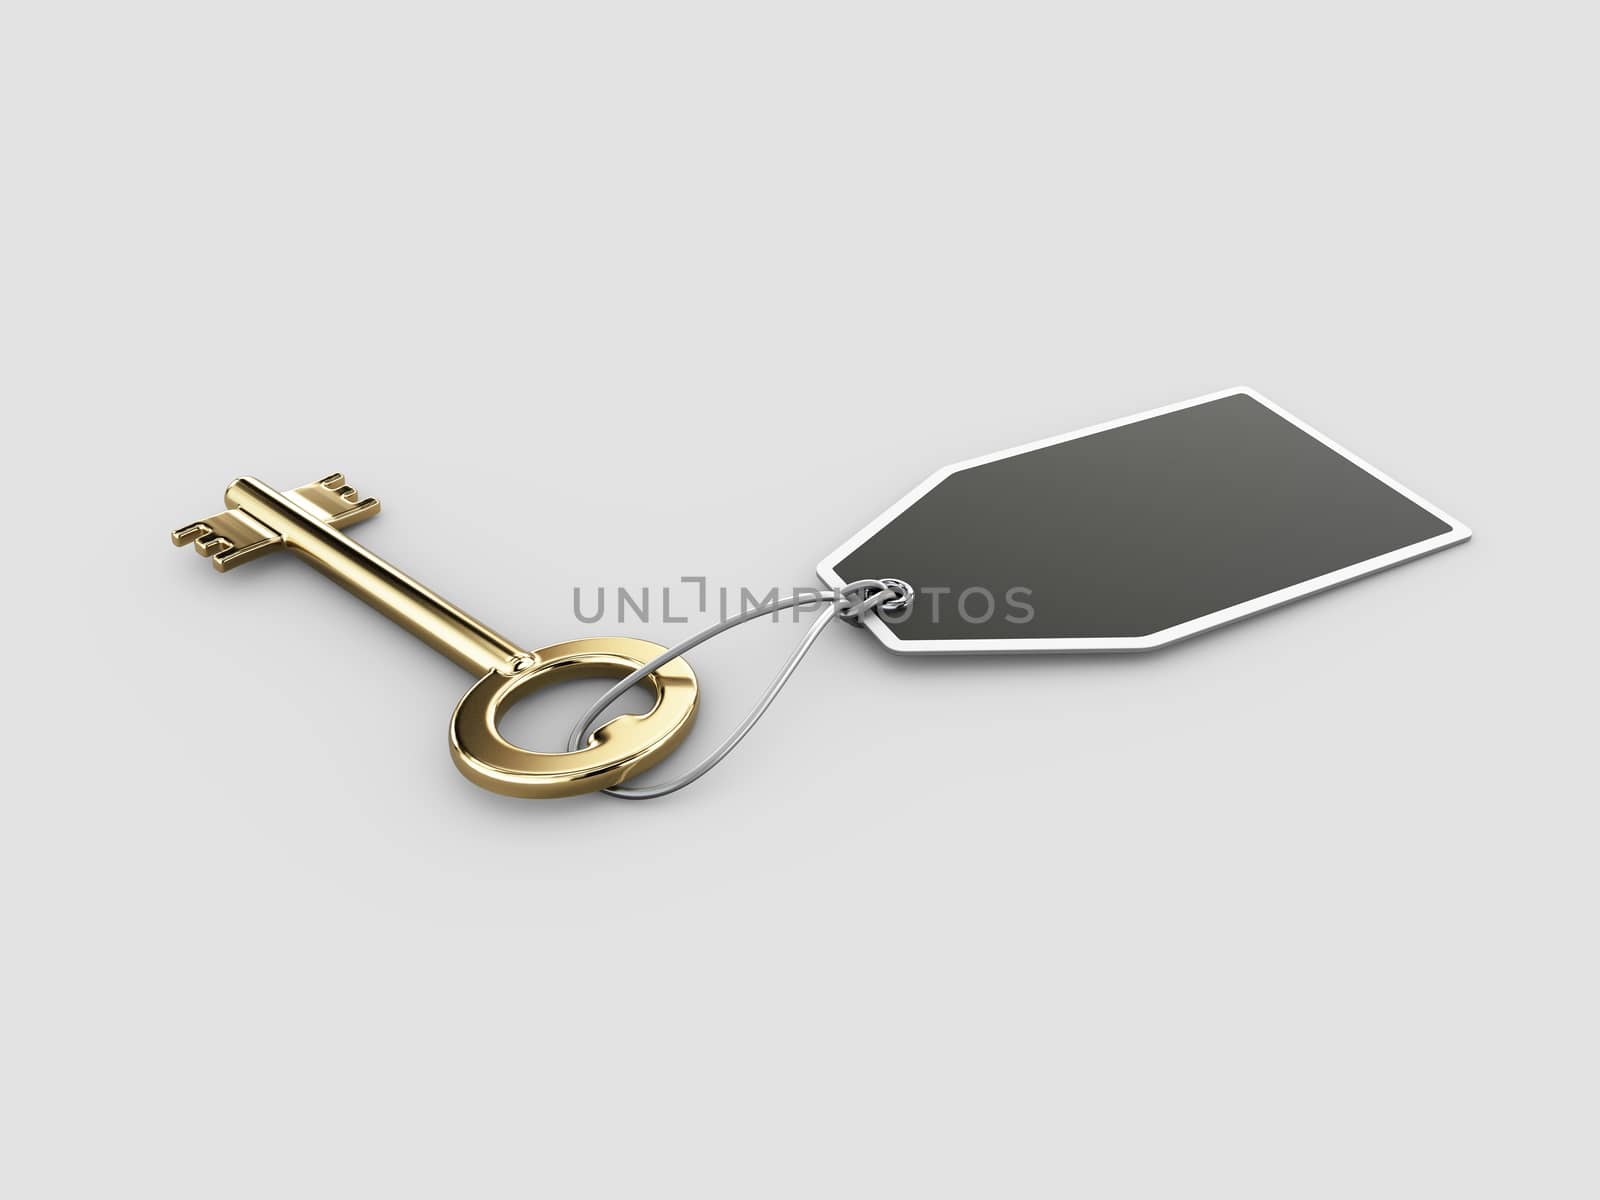 3d rendering of Keys with label, clipping path included by tussik